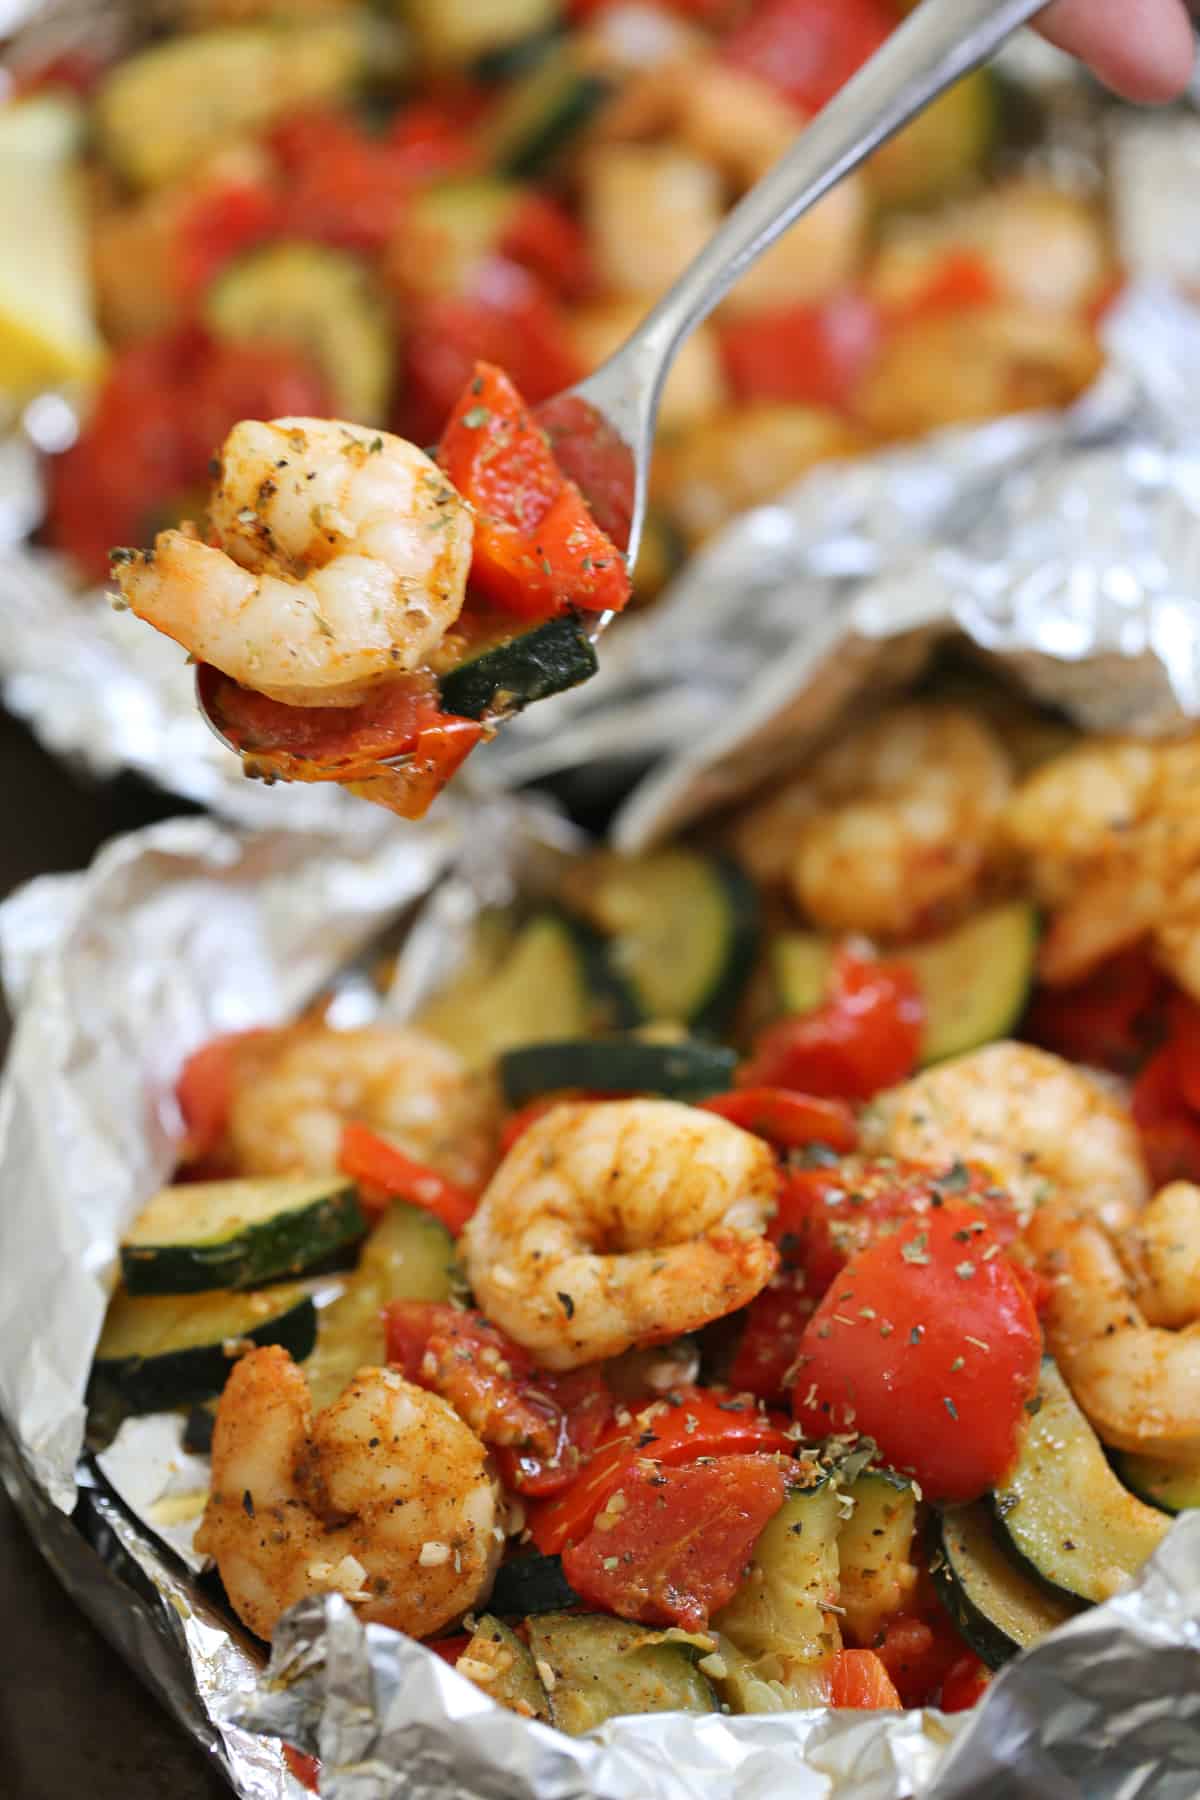 shrimp and vegetables in a grilled foil pack and on a fork